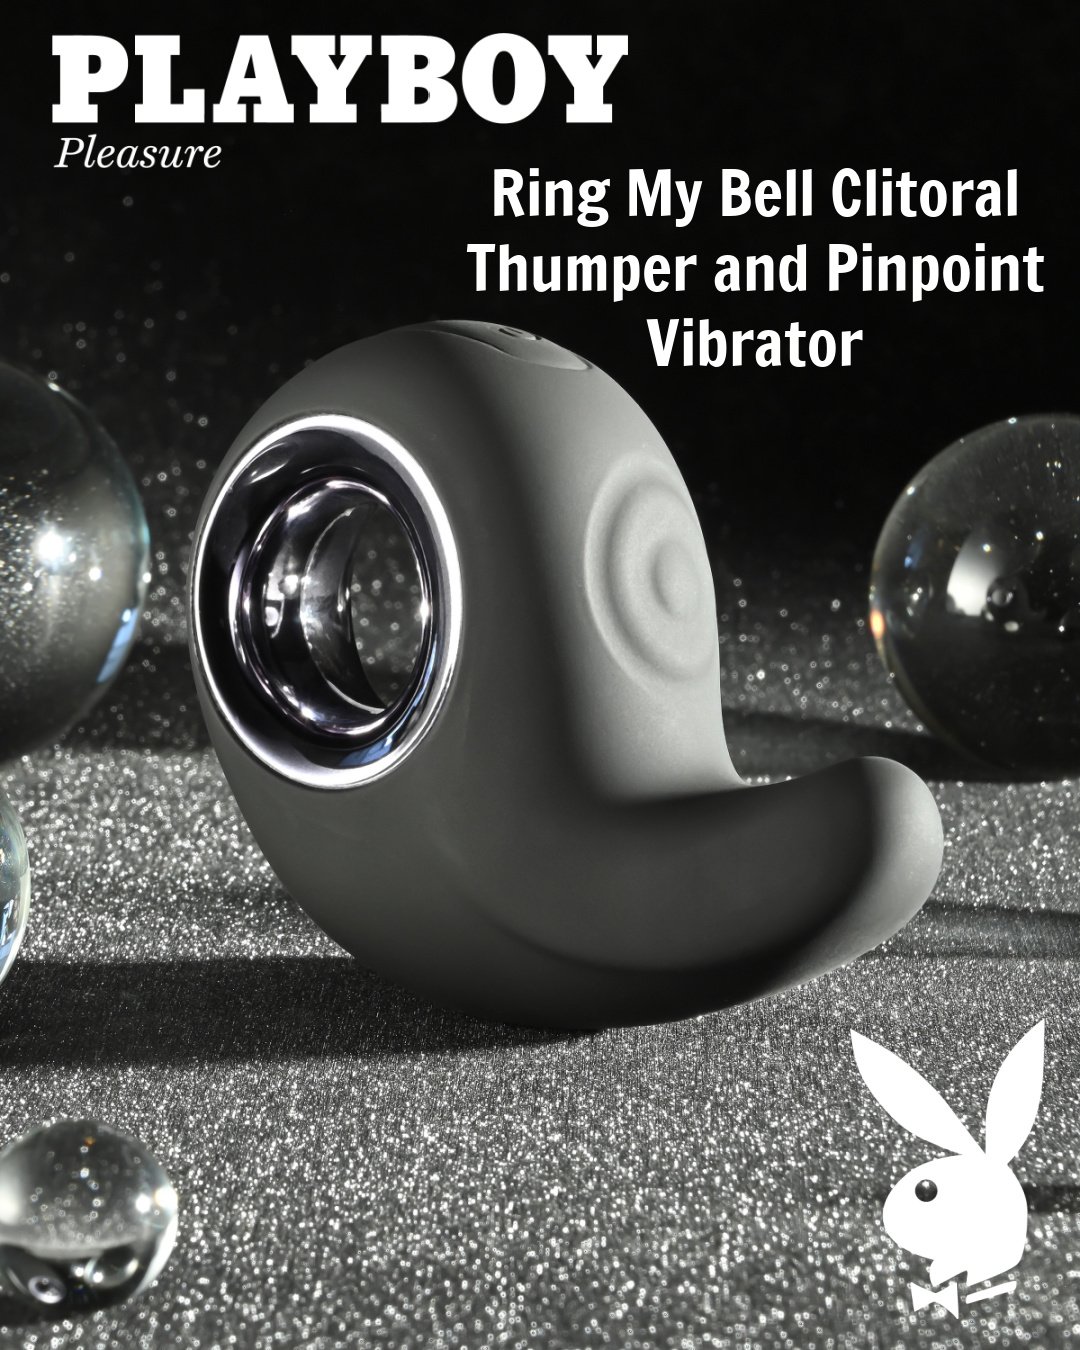 Playboy Ring My Bell Clitoral Thumper and Pinpoint Vibrator